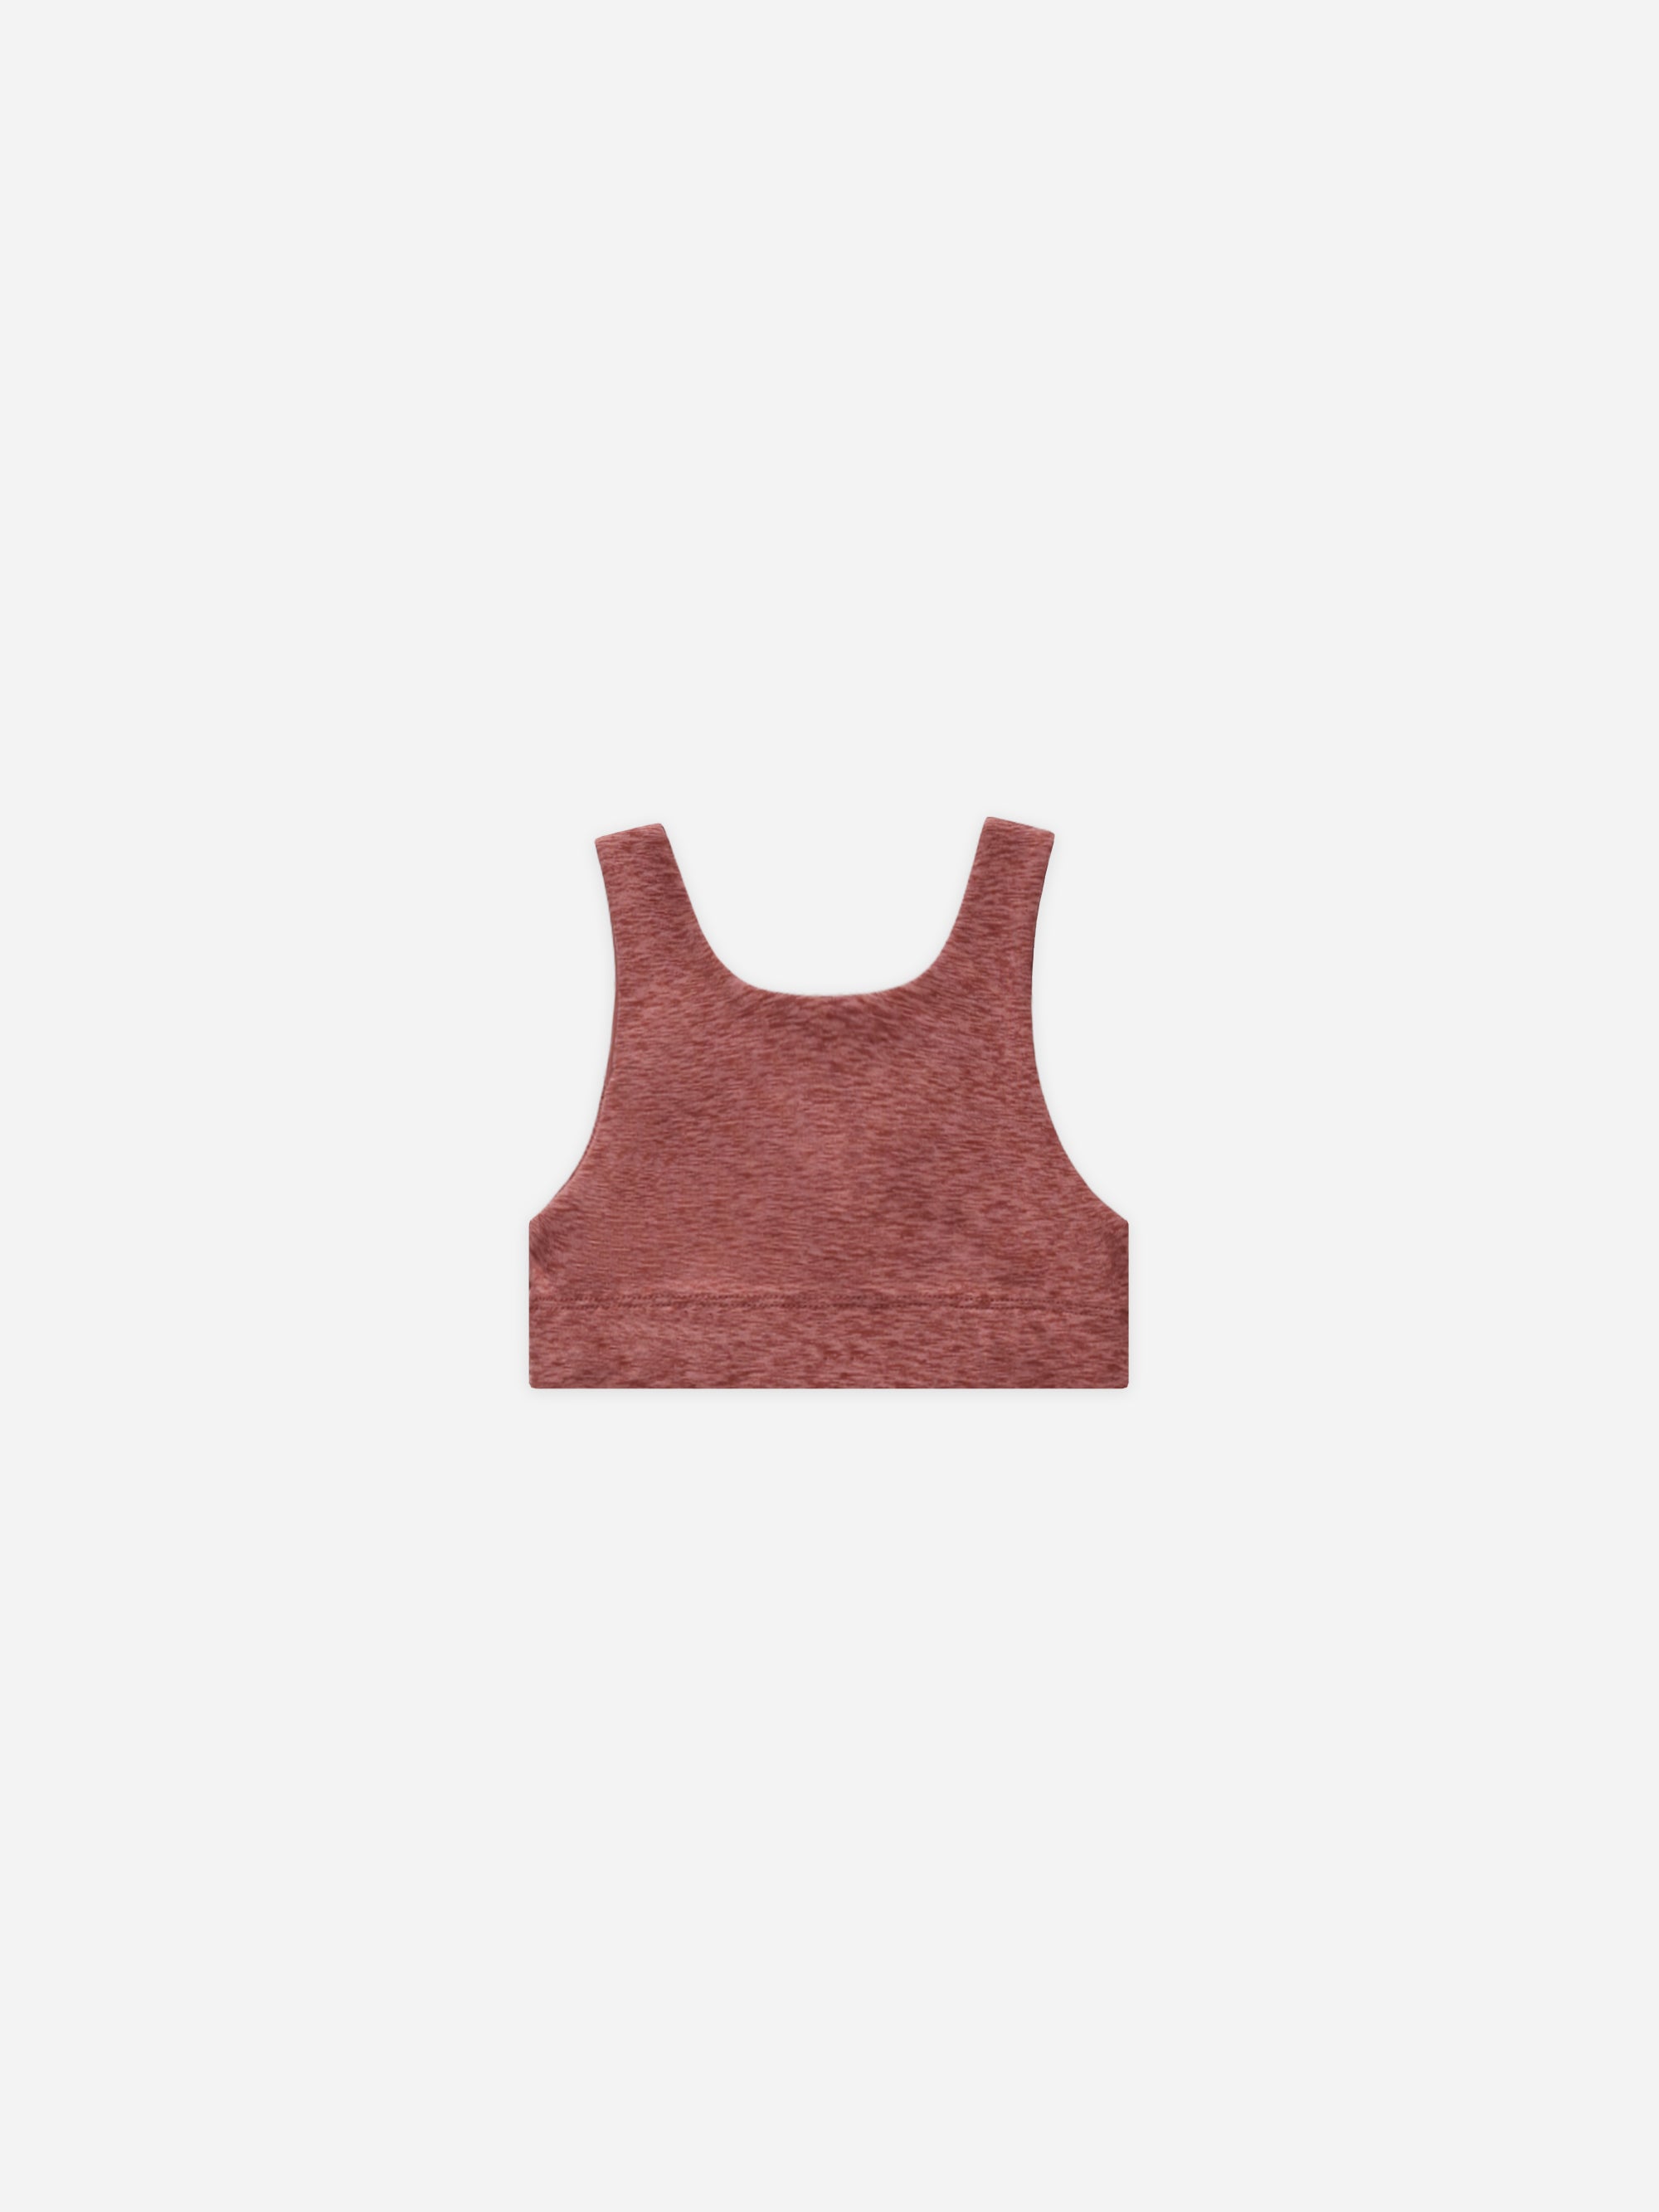 Swift Sports Bra || Heathered Strawberry - Rylee + Cru | Kids Clothes | Trendy Baby Clothes | Modern Infant Outfits |